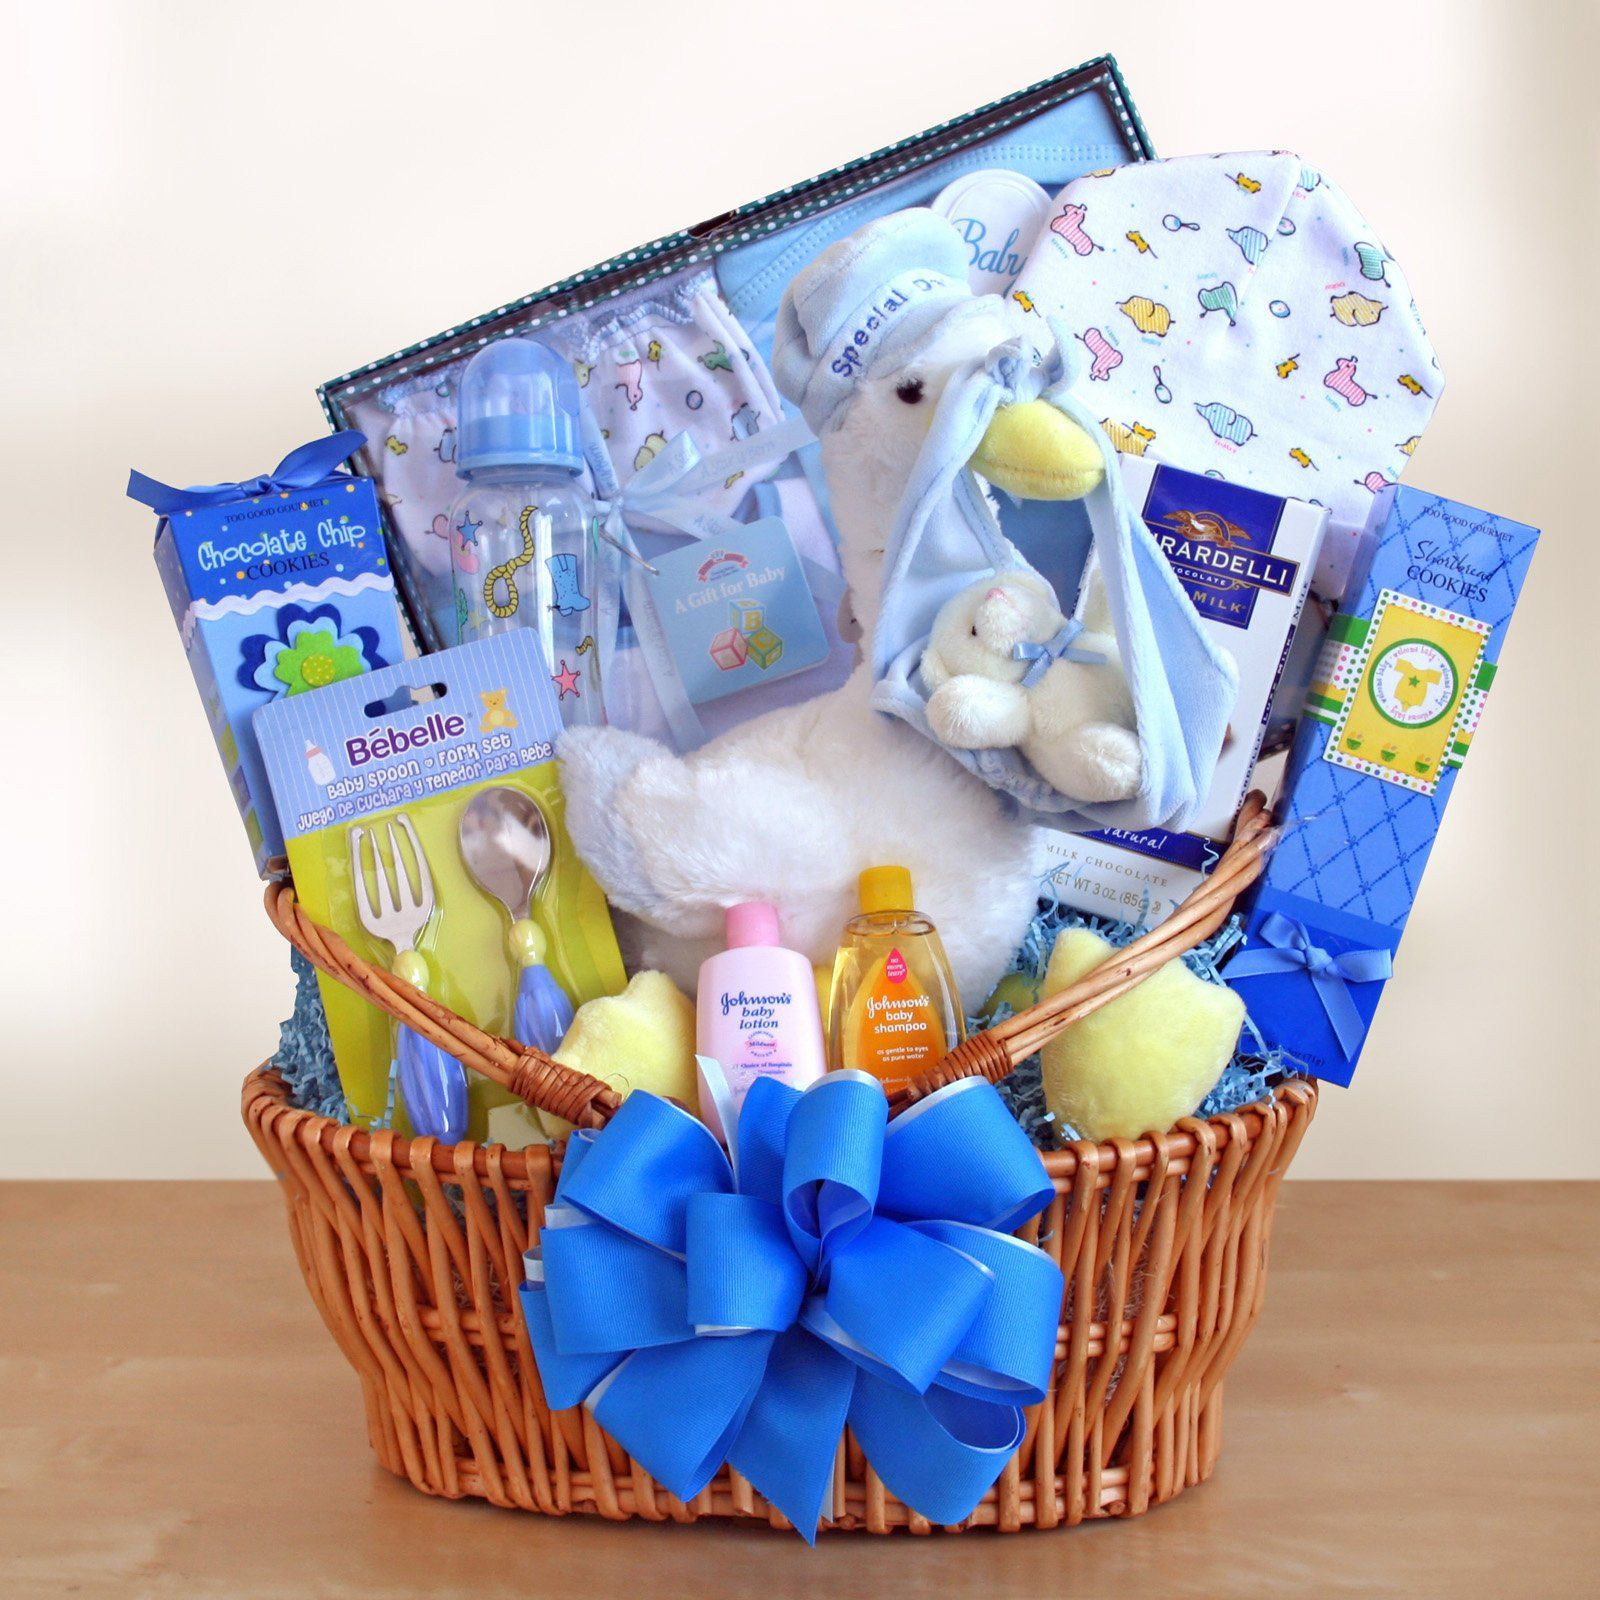 Baby Gift Ideas Pinterest
 Special Stork Delivery Baby Boy Gift Basket